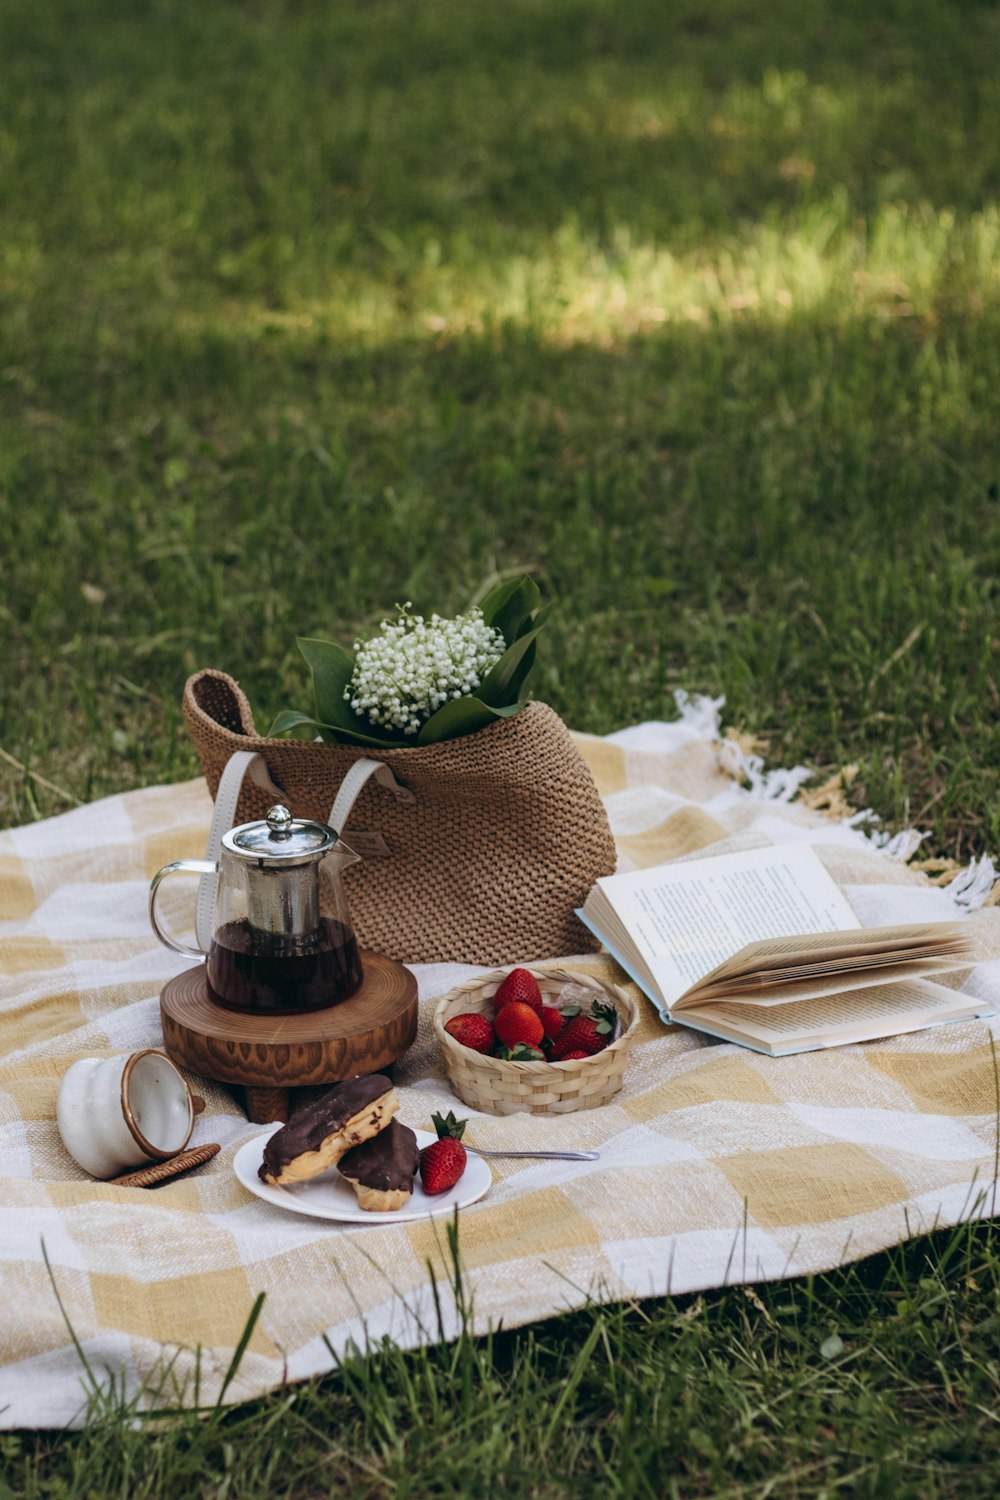 a picnic blanket on the grass with a tea pot, book, strawberries,